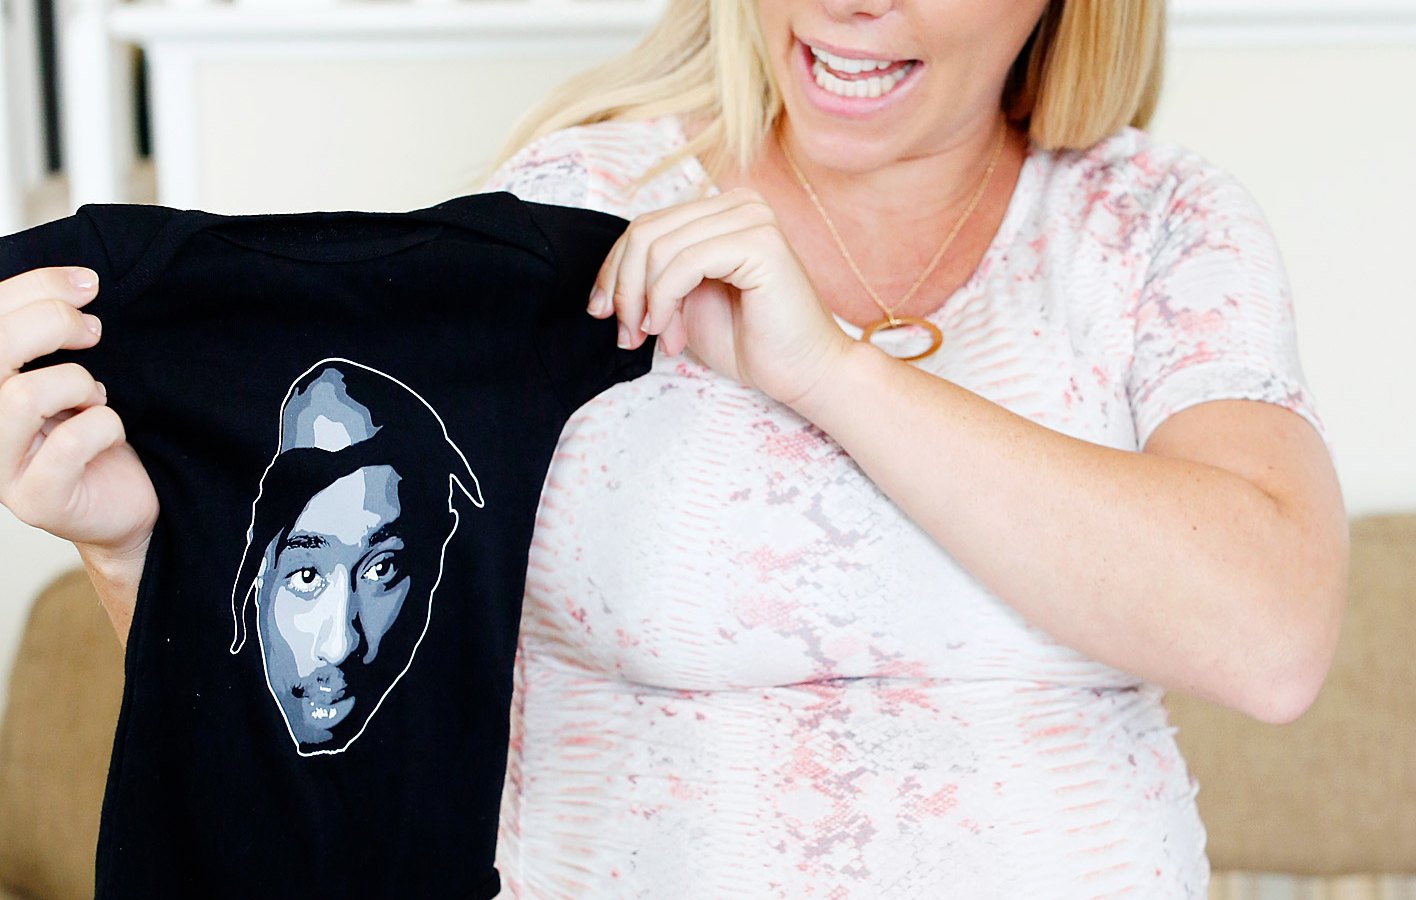 Kendra Wilkinson receives a onesie with Tupac on it at her baby shower